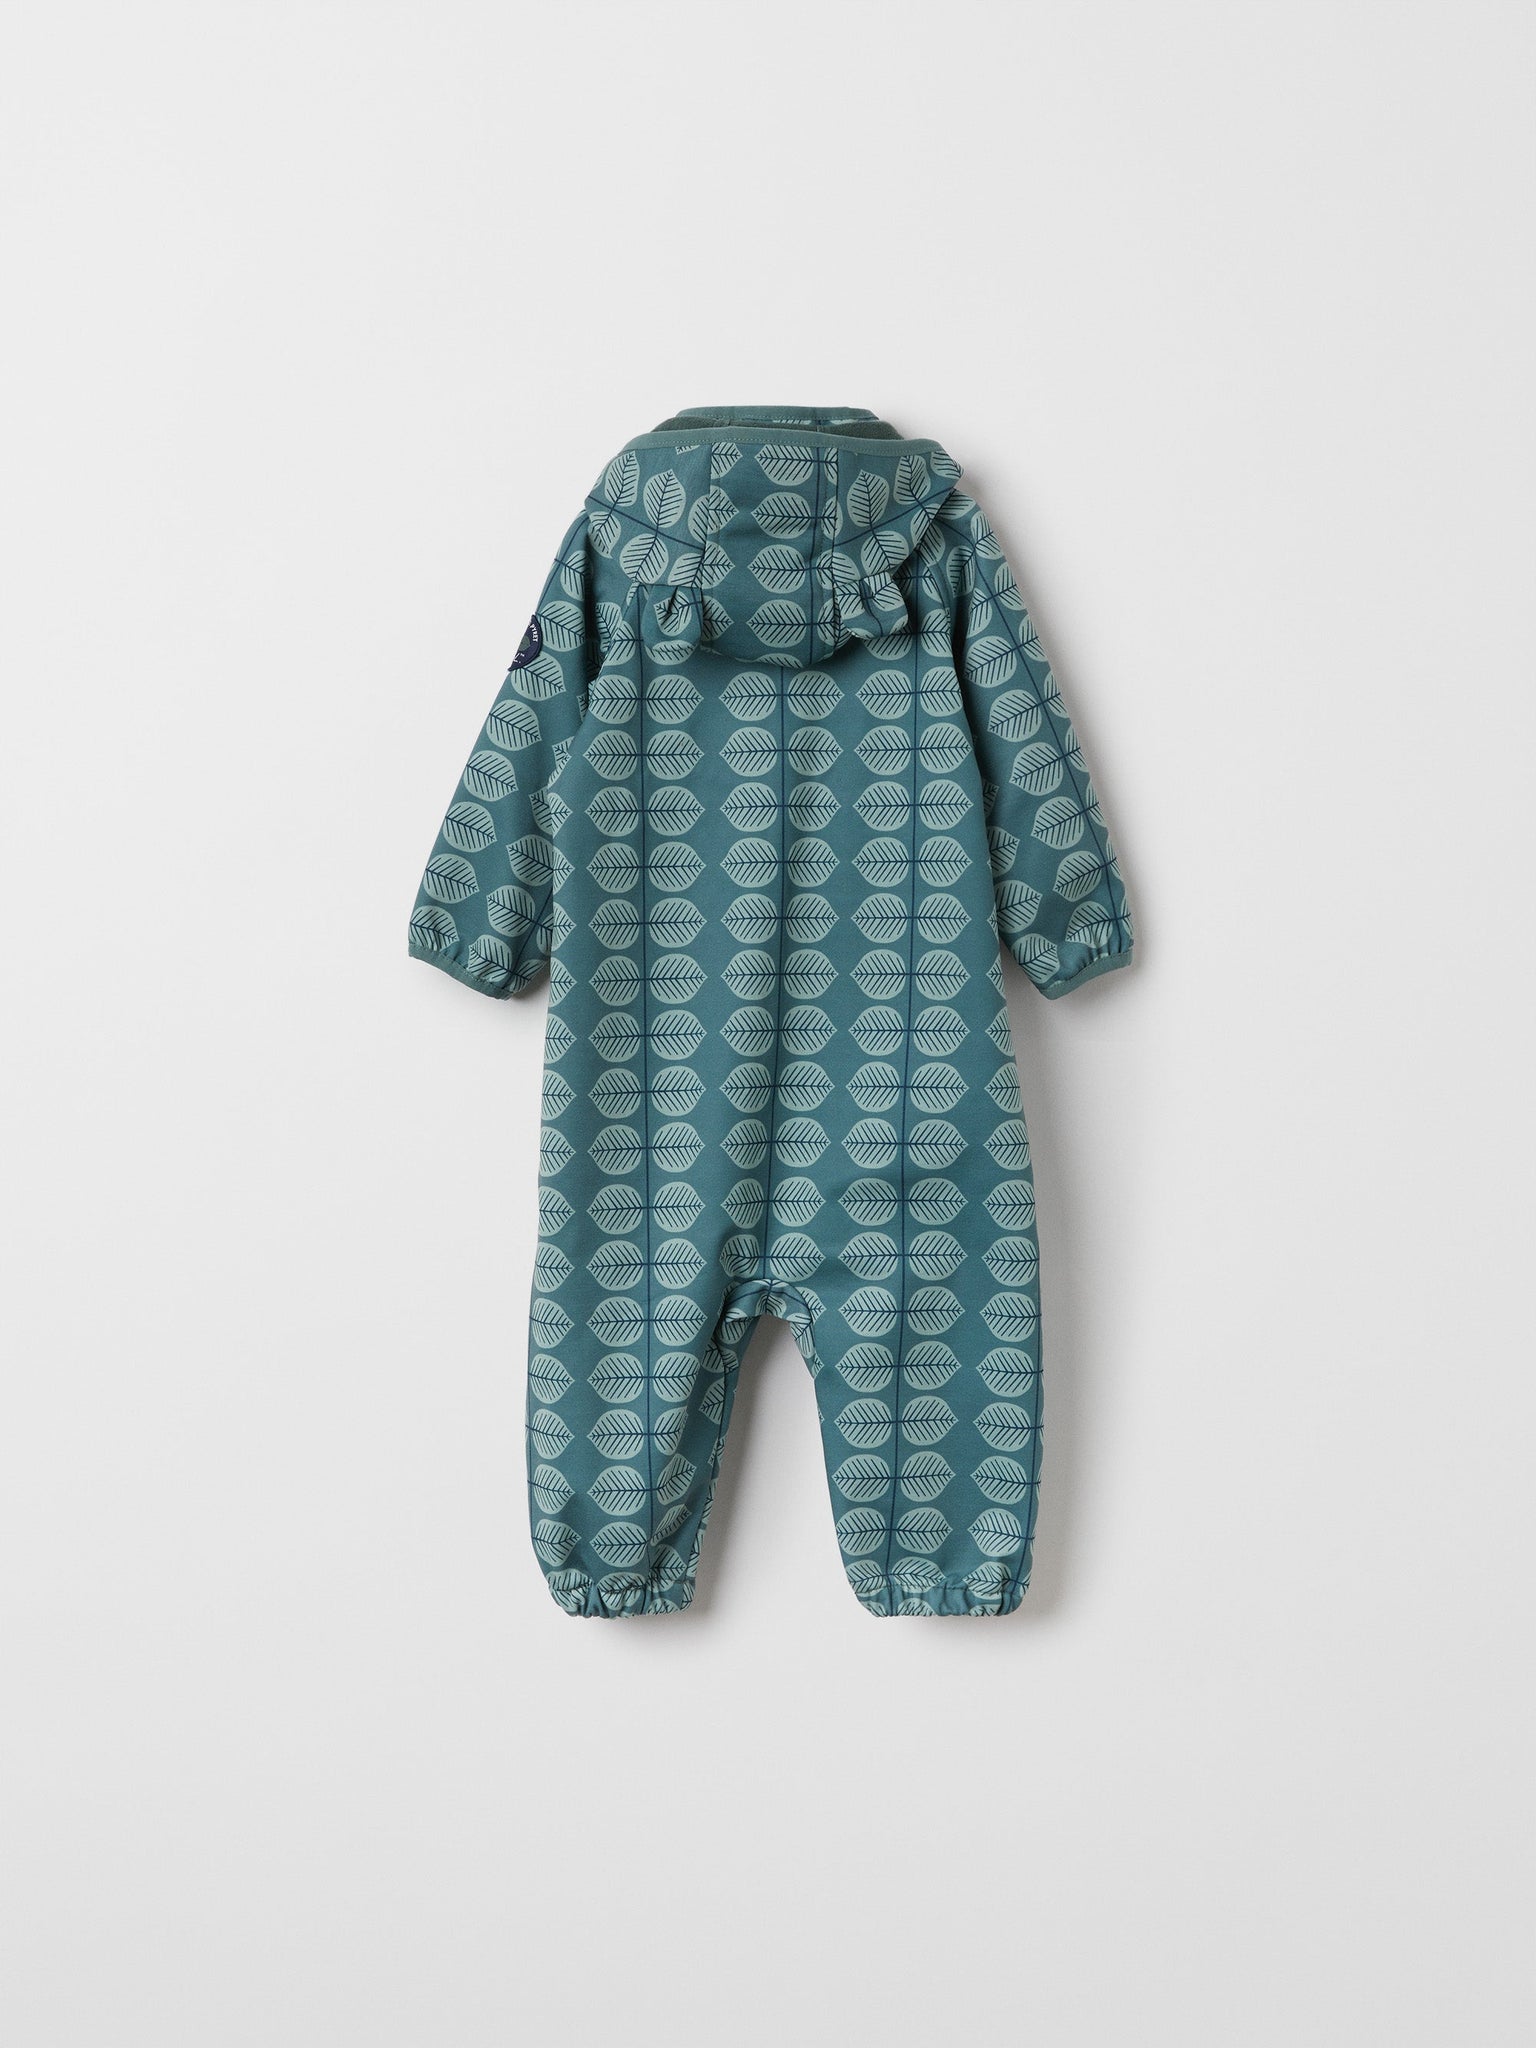 Green Windproof Fleece Baby Pramsuit from the Polarn O. Pyret outerwear collection. The best ethical kids outerwear.